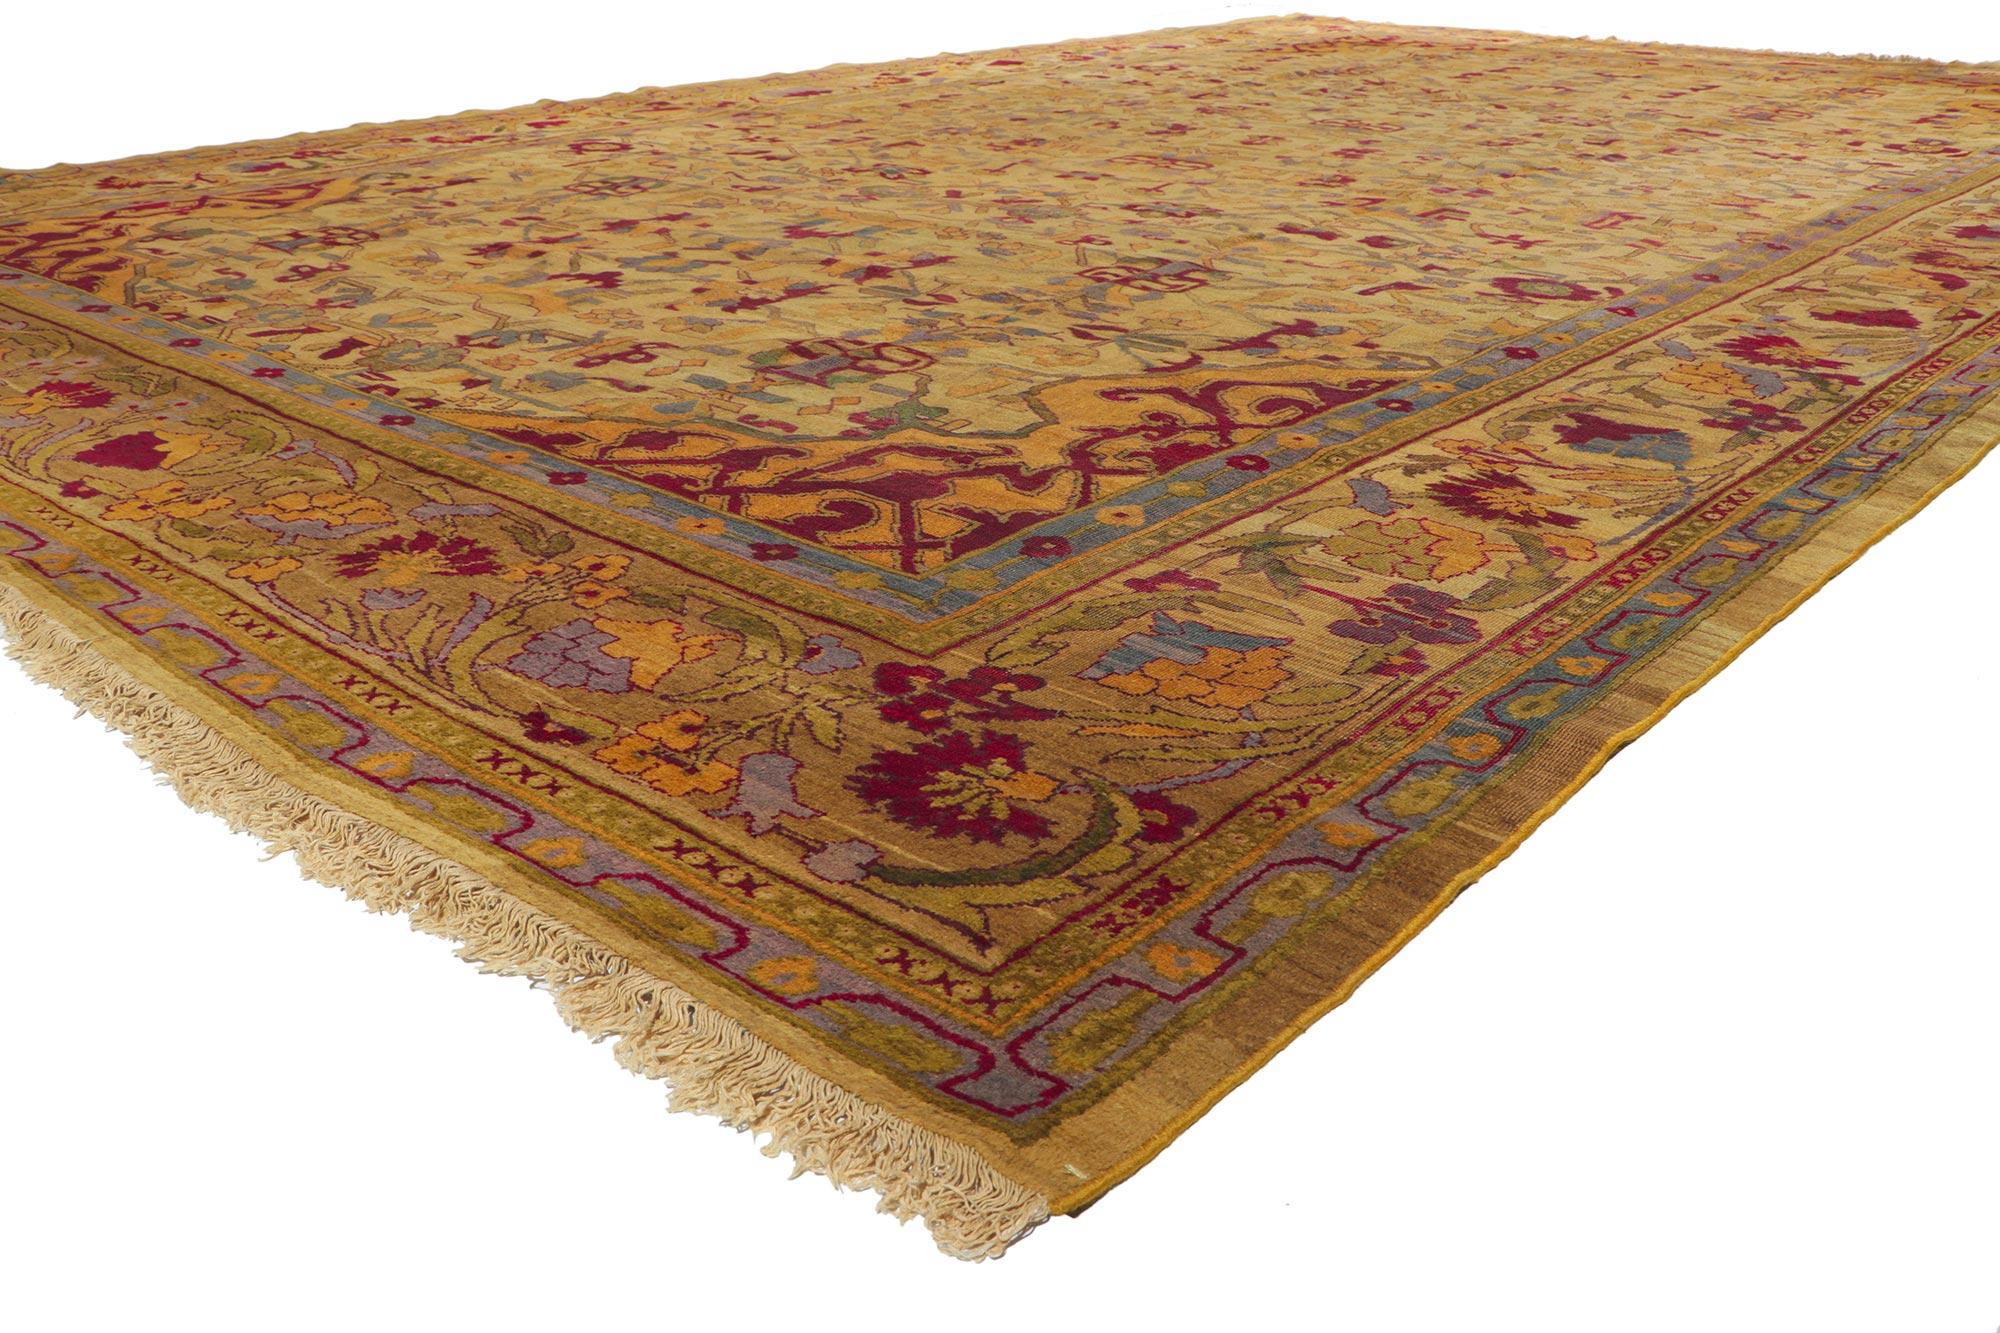 70247 Antique Indian Agra Room Size Rug with Art Deco Style. Cleverly composed and distinctively well-balanced, this antique Indian Agra displays an exceptional all-over geometric pattern in time-softened earth tones of golden yellow, slate,